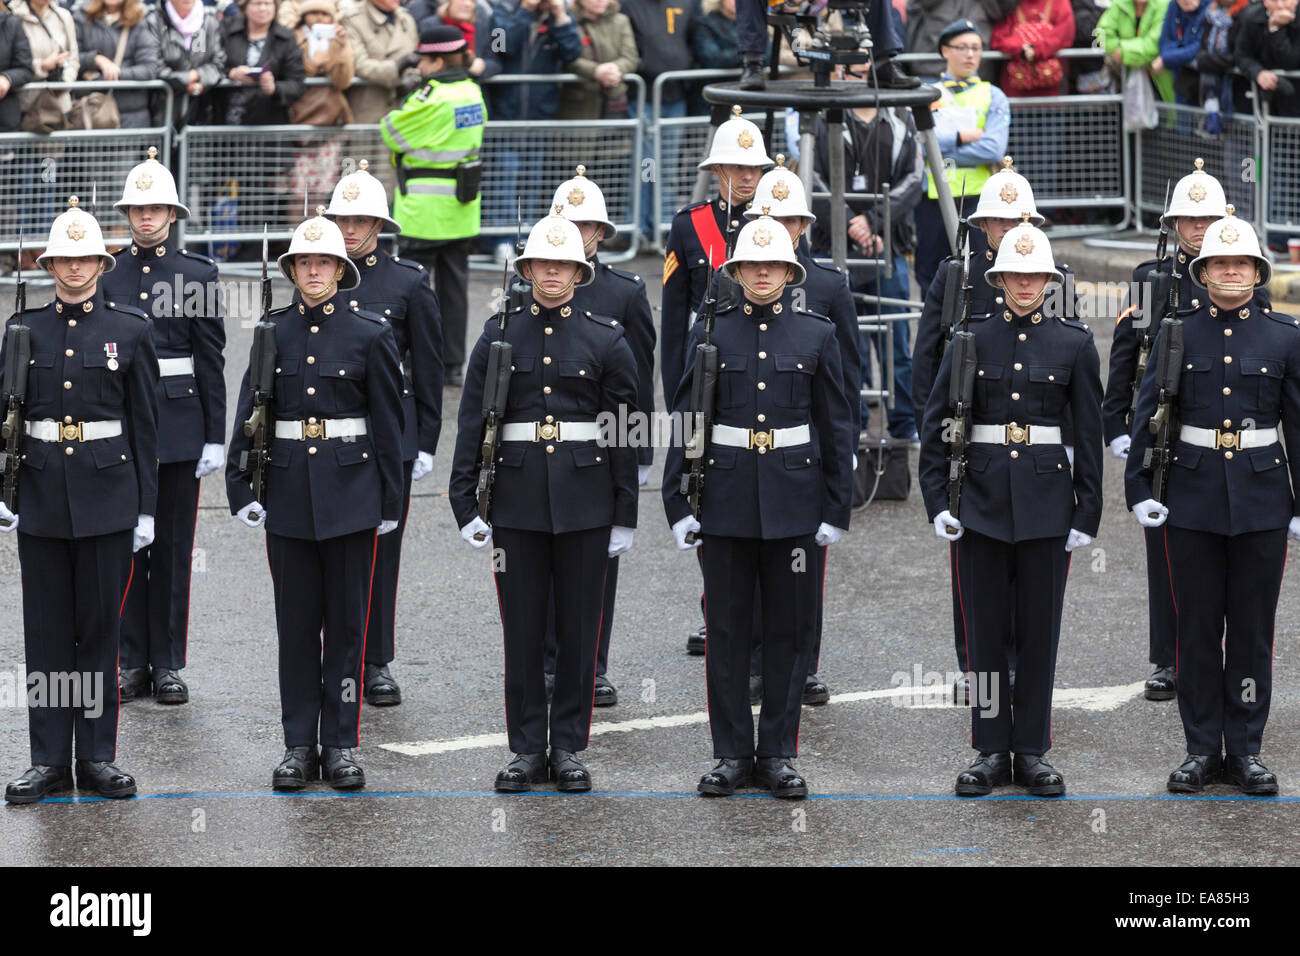 8th November 2014, Lord Mayor's Show, City of London, London, UK. Members of Her Majesty's Royal Marines stand in line at the start of the procession near Mansion House. The Lord Mayor's Show is the oldest civil procession in the world, it celebrates the start of a one-year term for the new Mayor of the City of London. Stock Photo